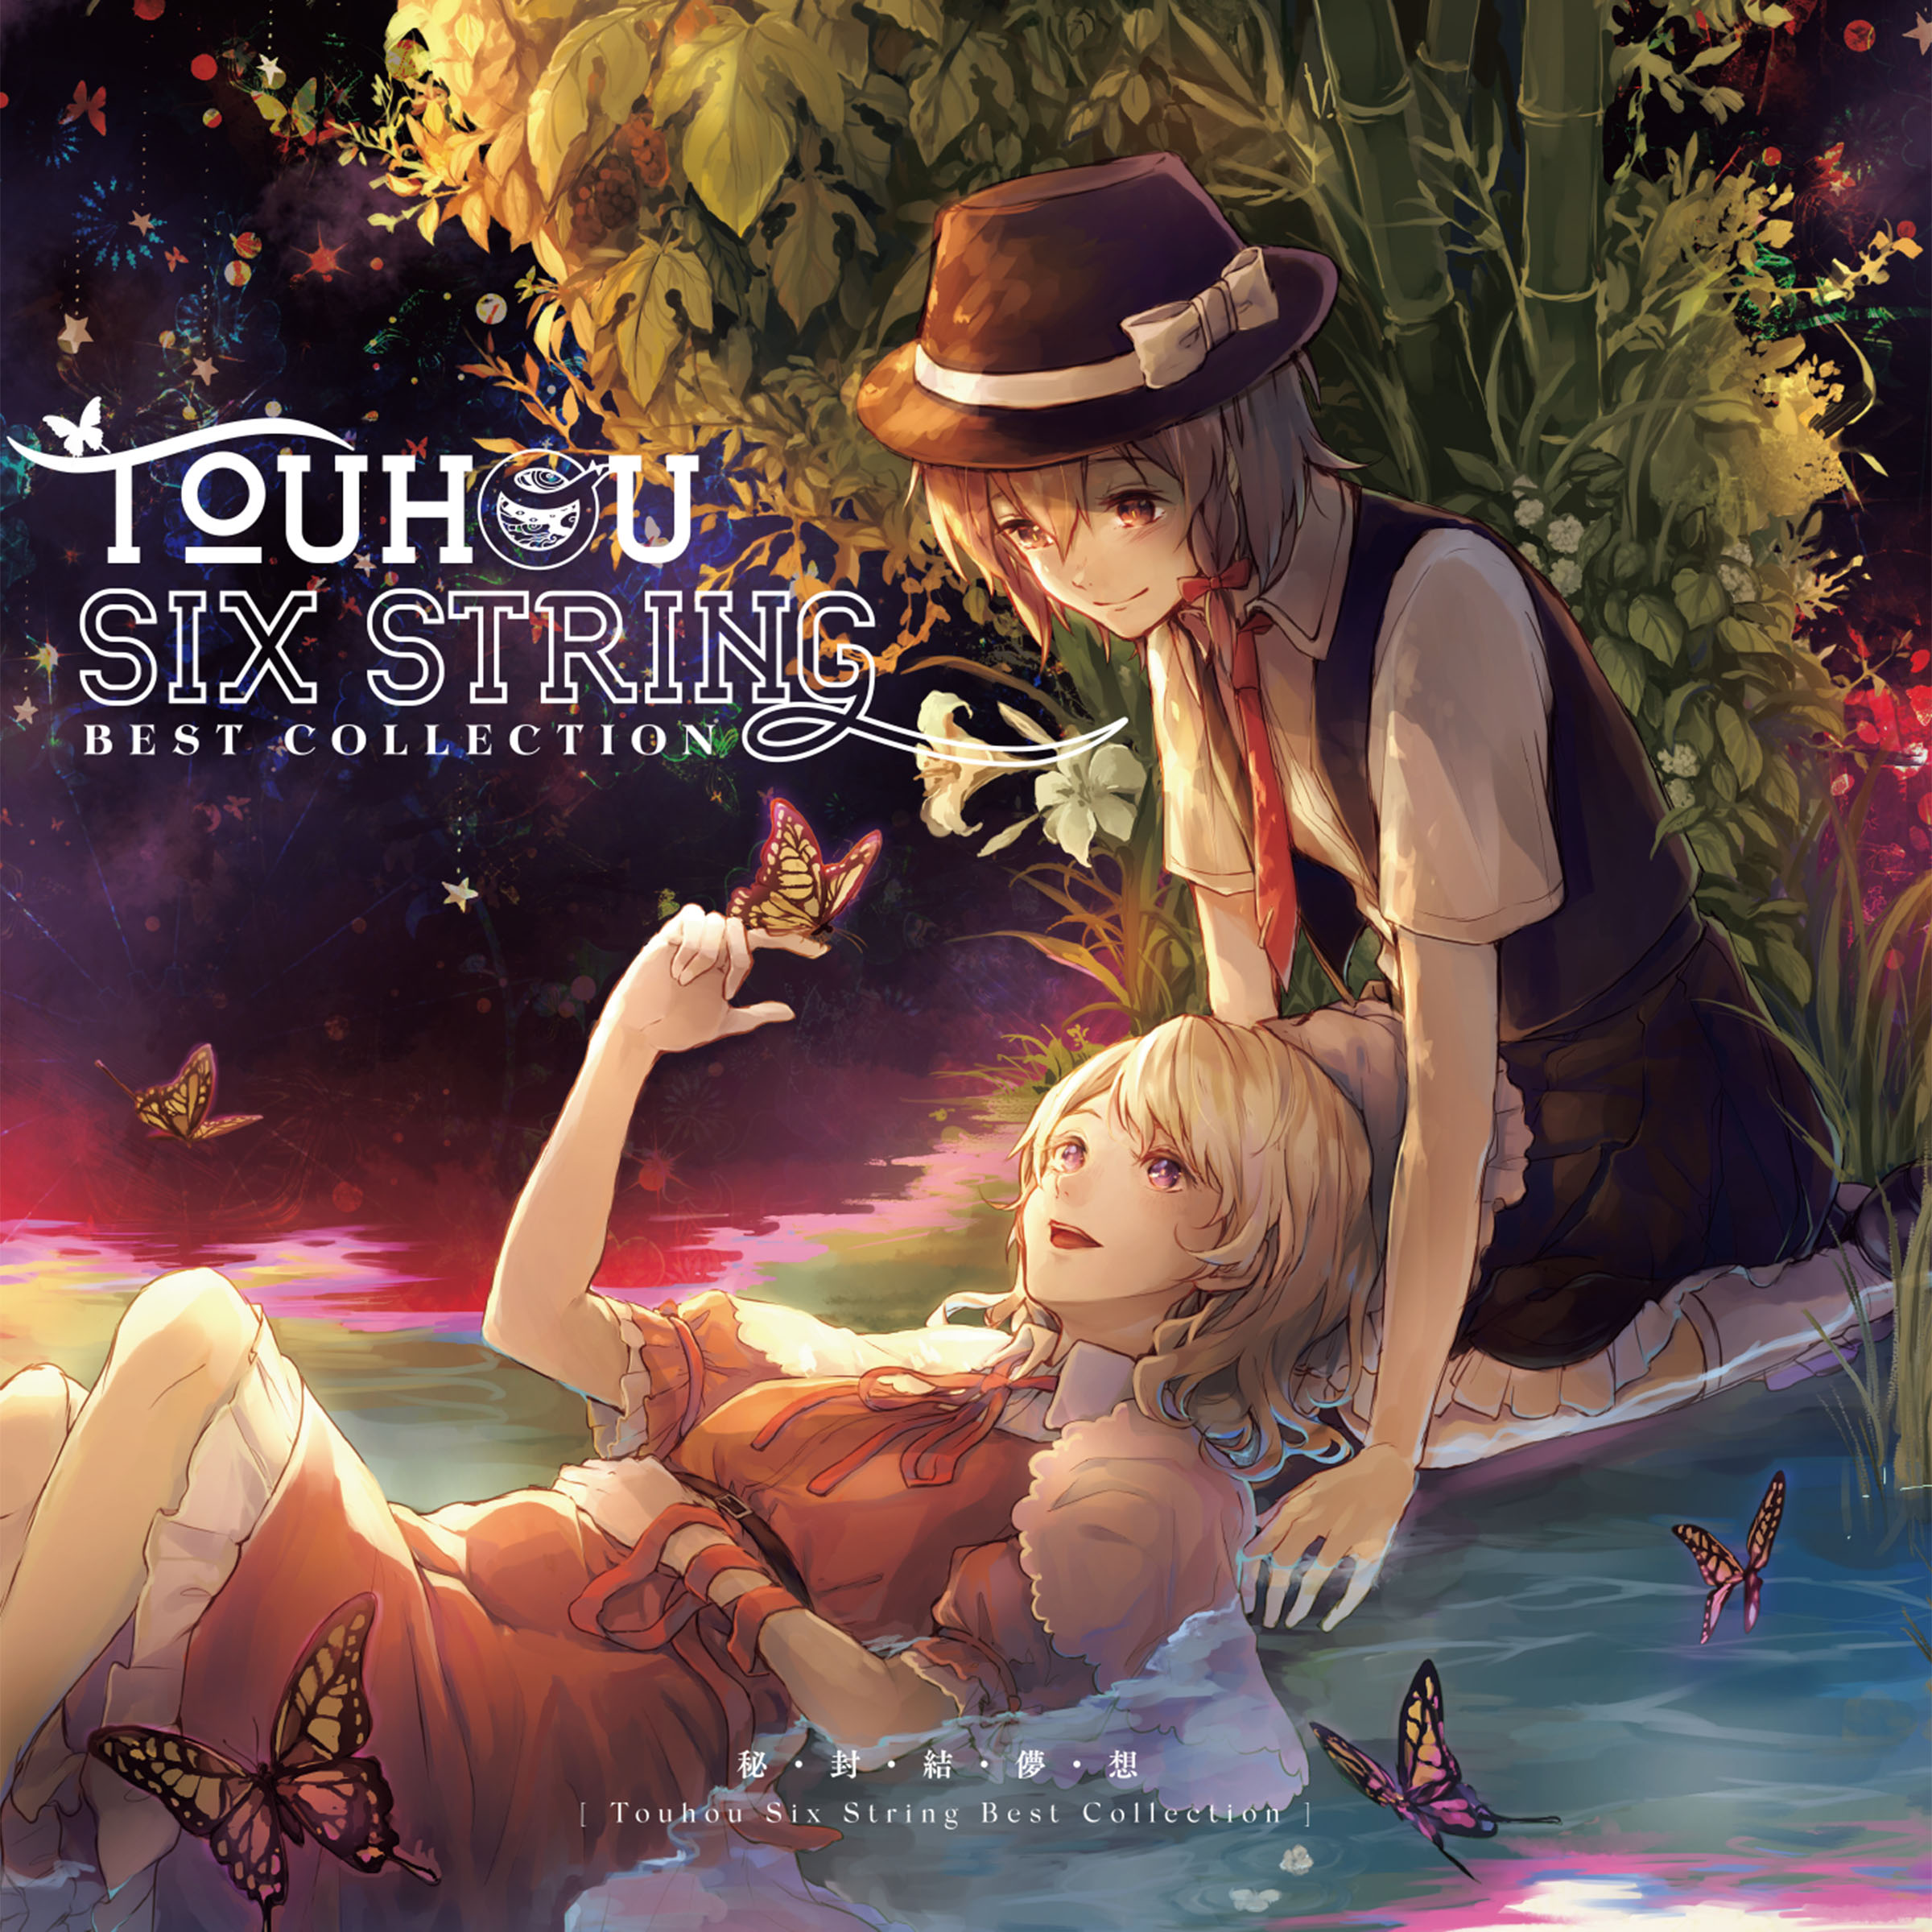 Touhou Si x String Best Collection